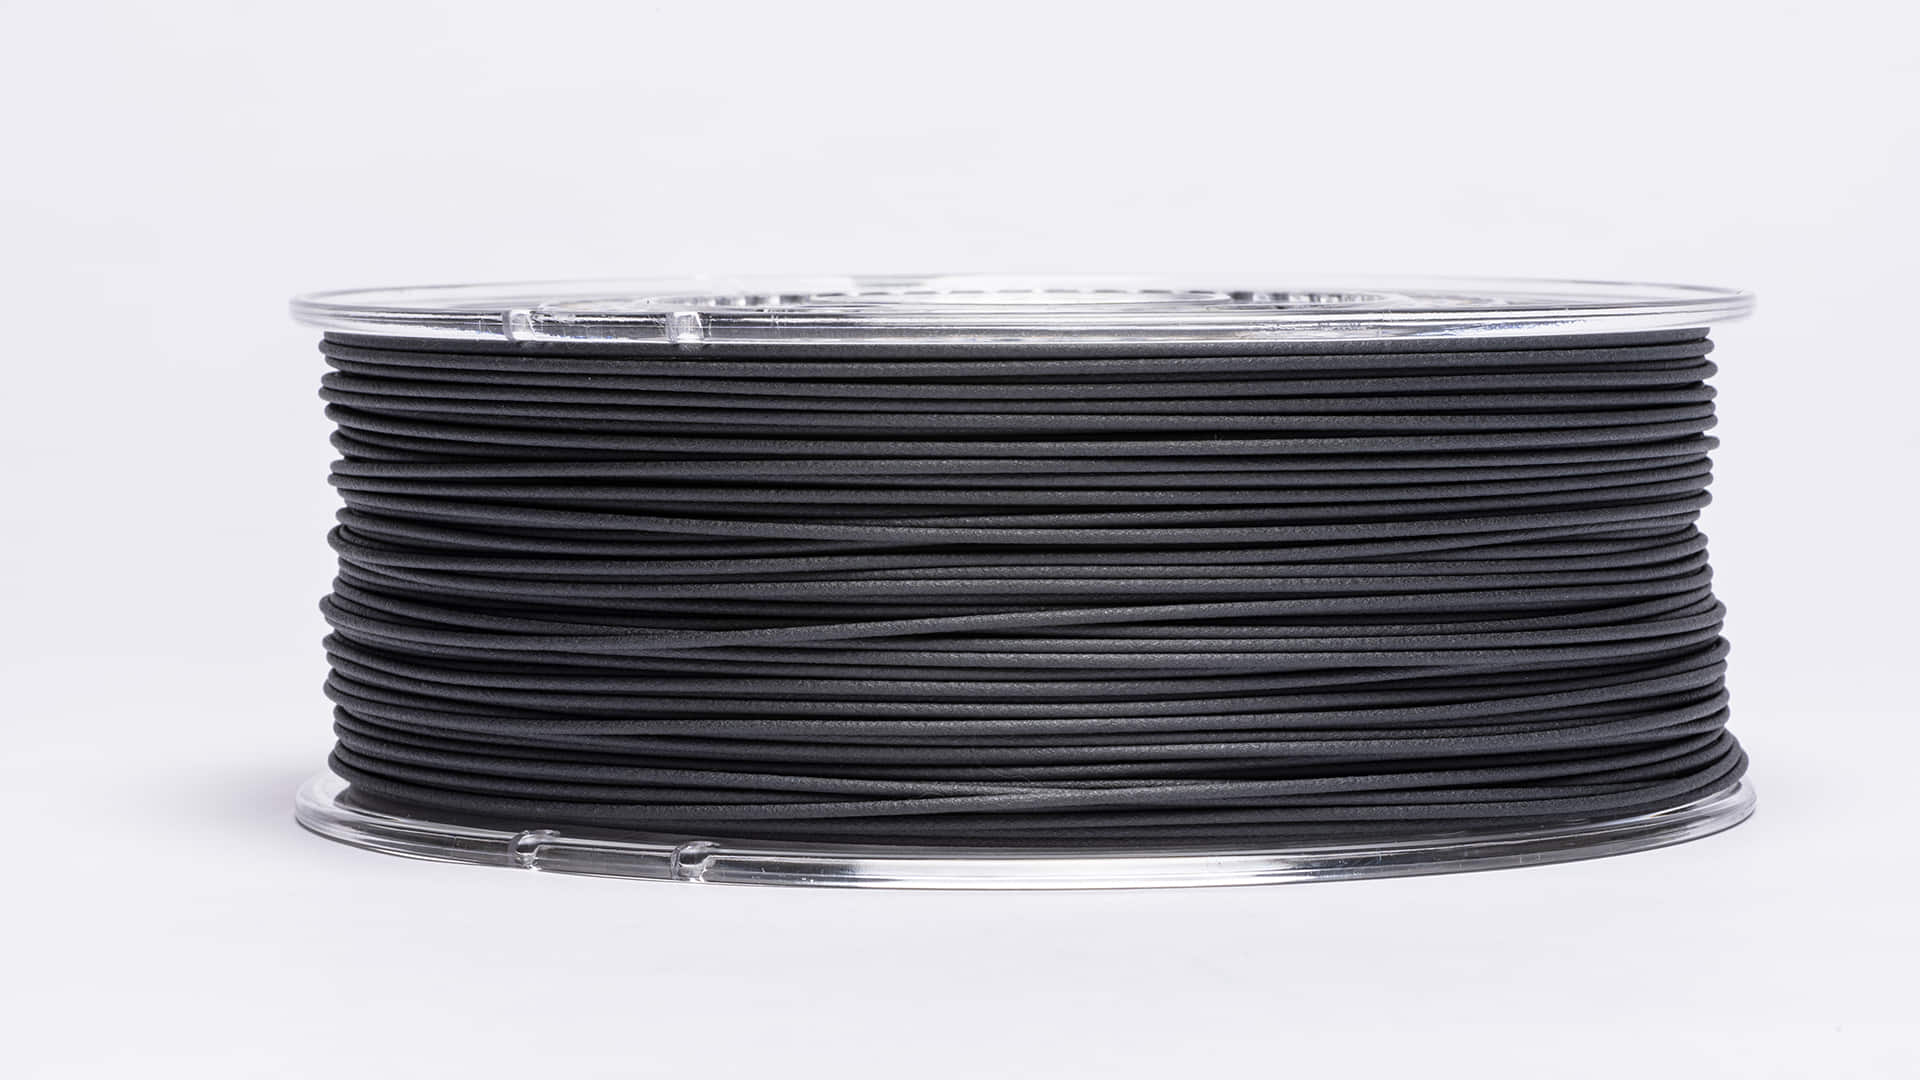 New opportunities in 3D printing with Evonik’s carbon fiber reinforced PEEK filament Image Source: Evonik